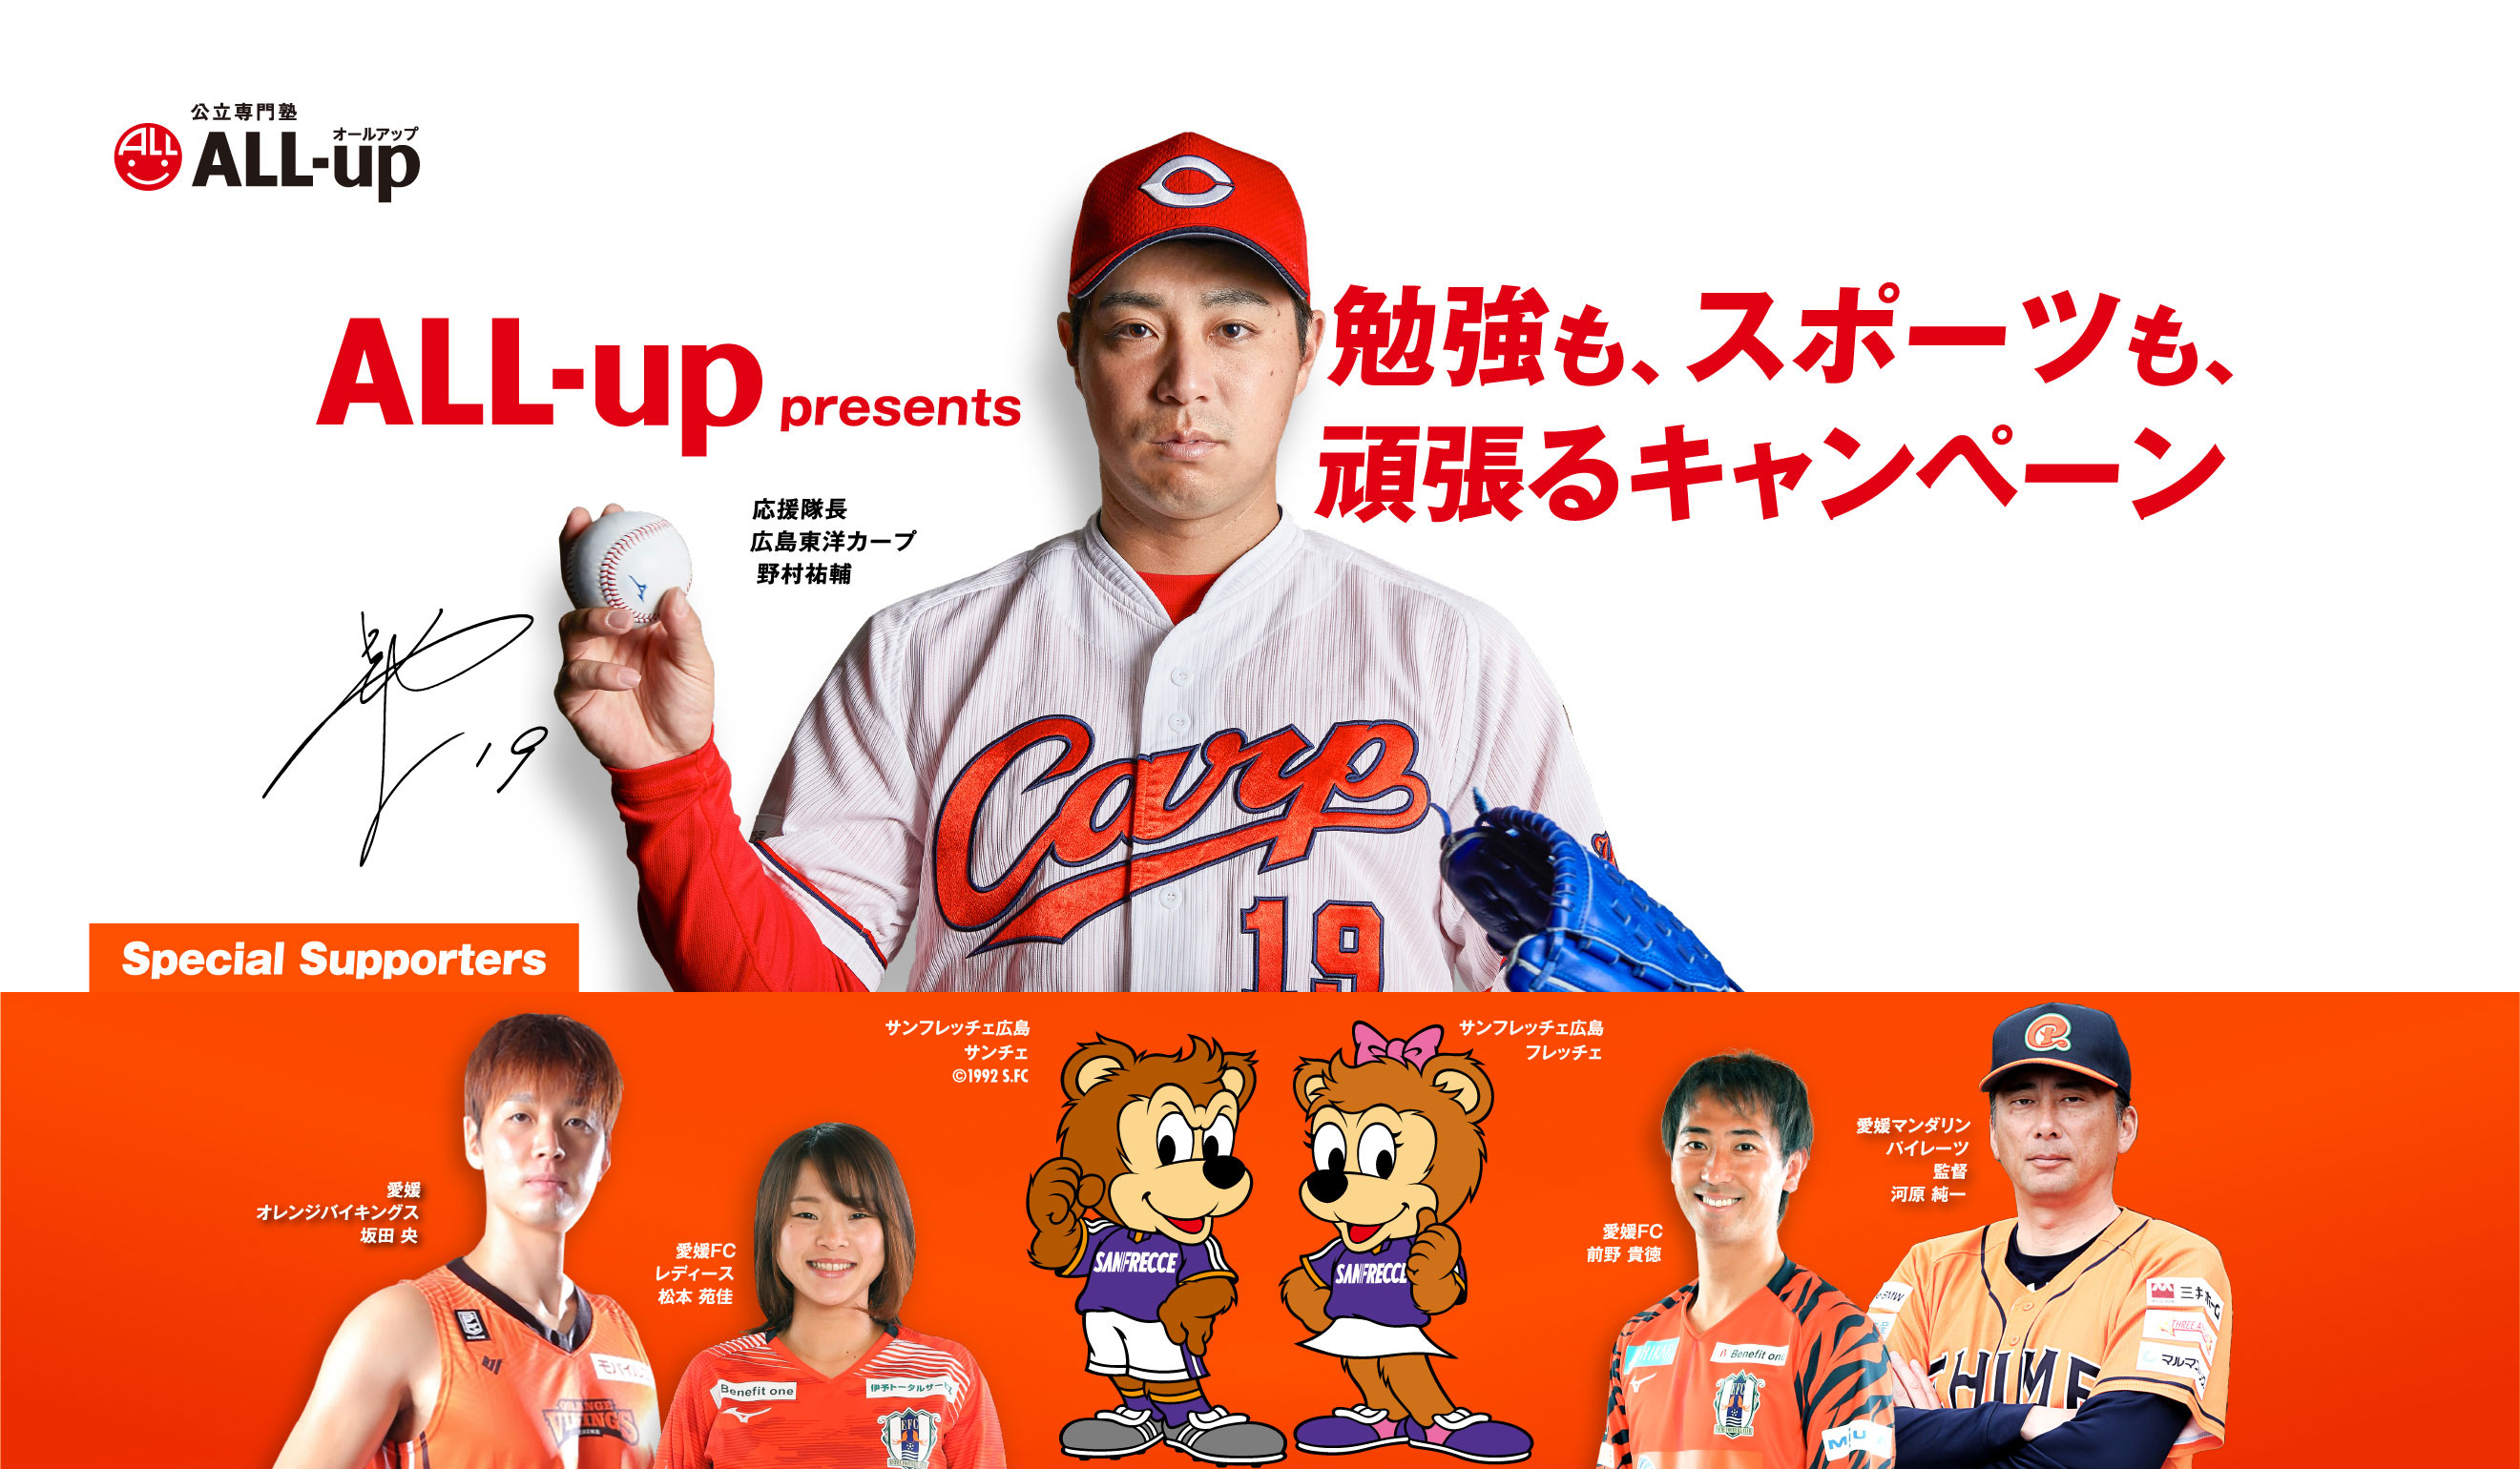 ALL-up presents 勉強も、スポーツも、頑張るキャンペーン